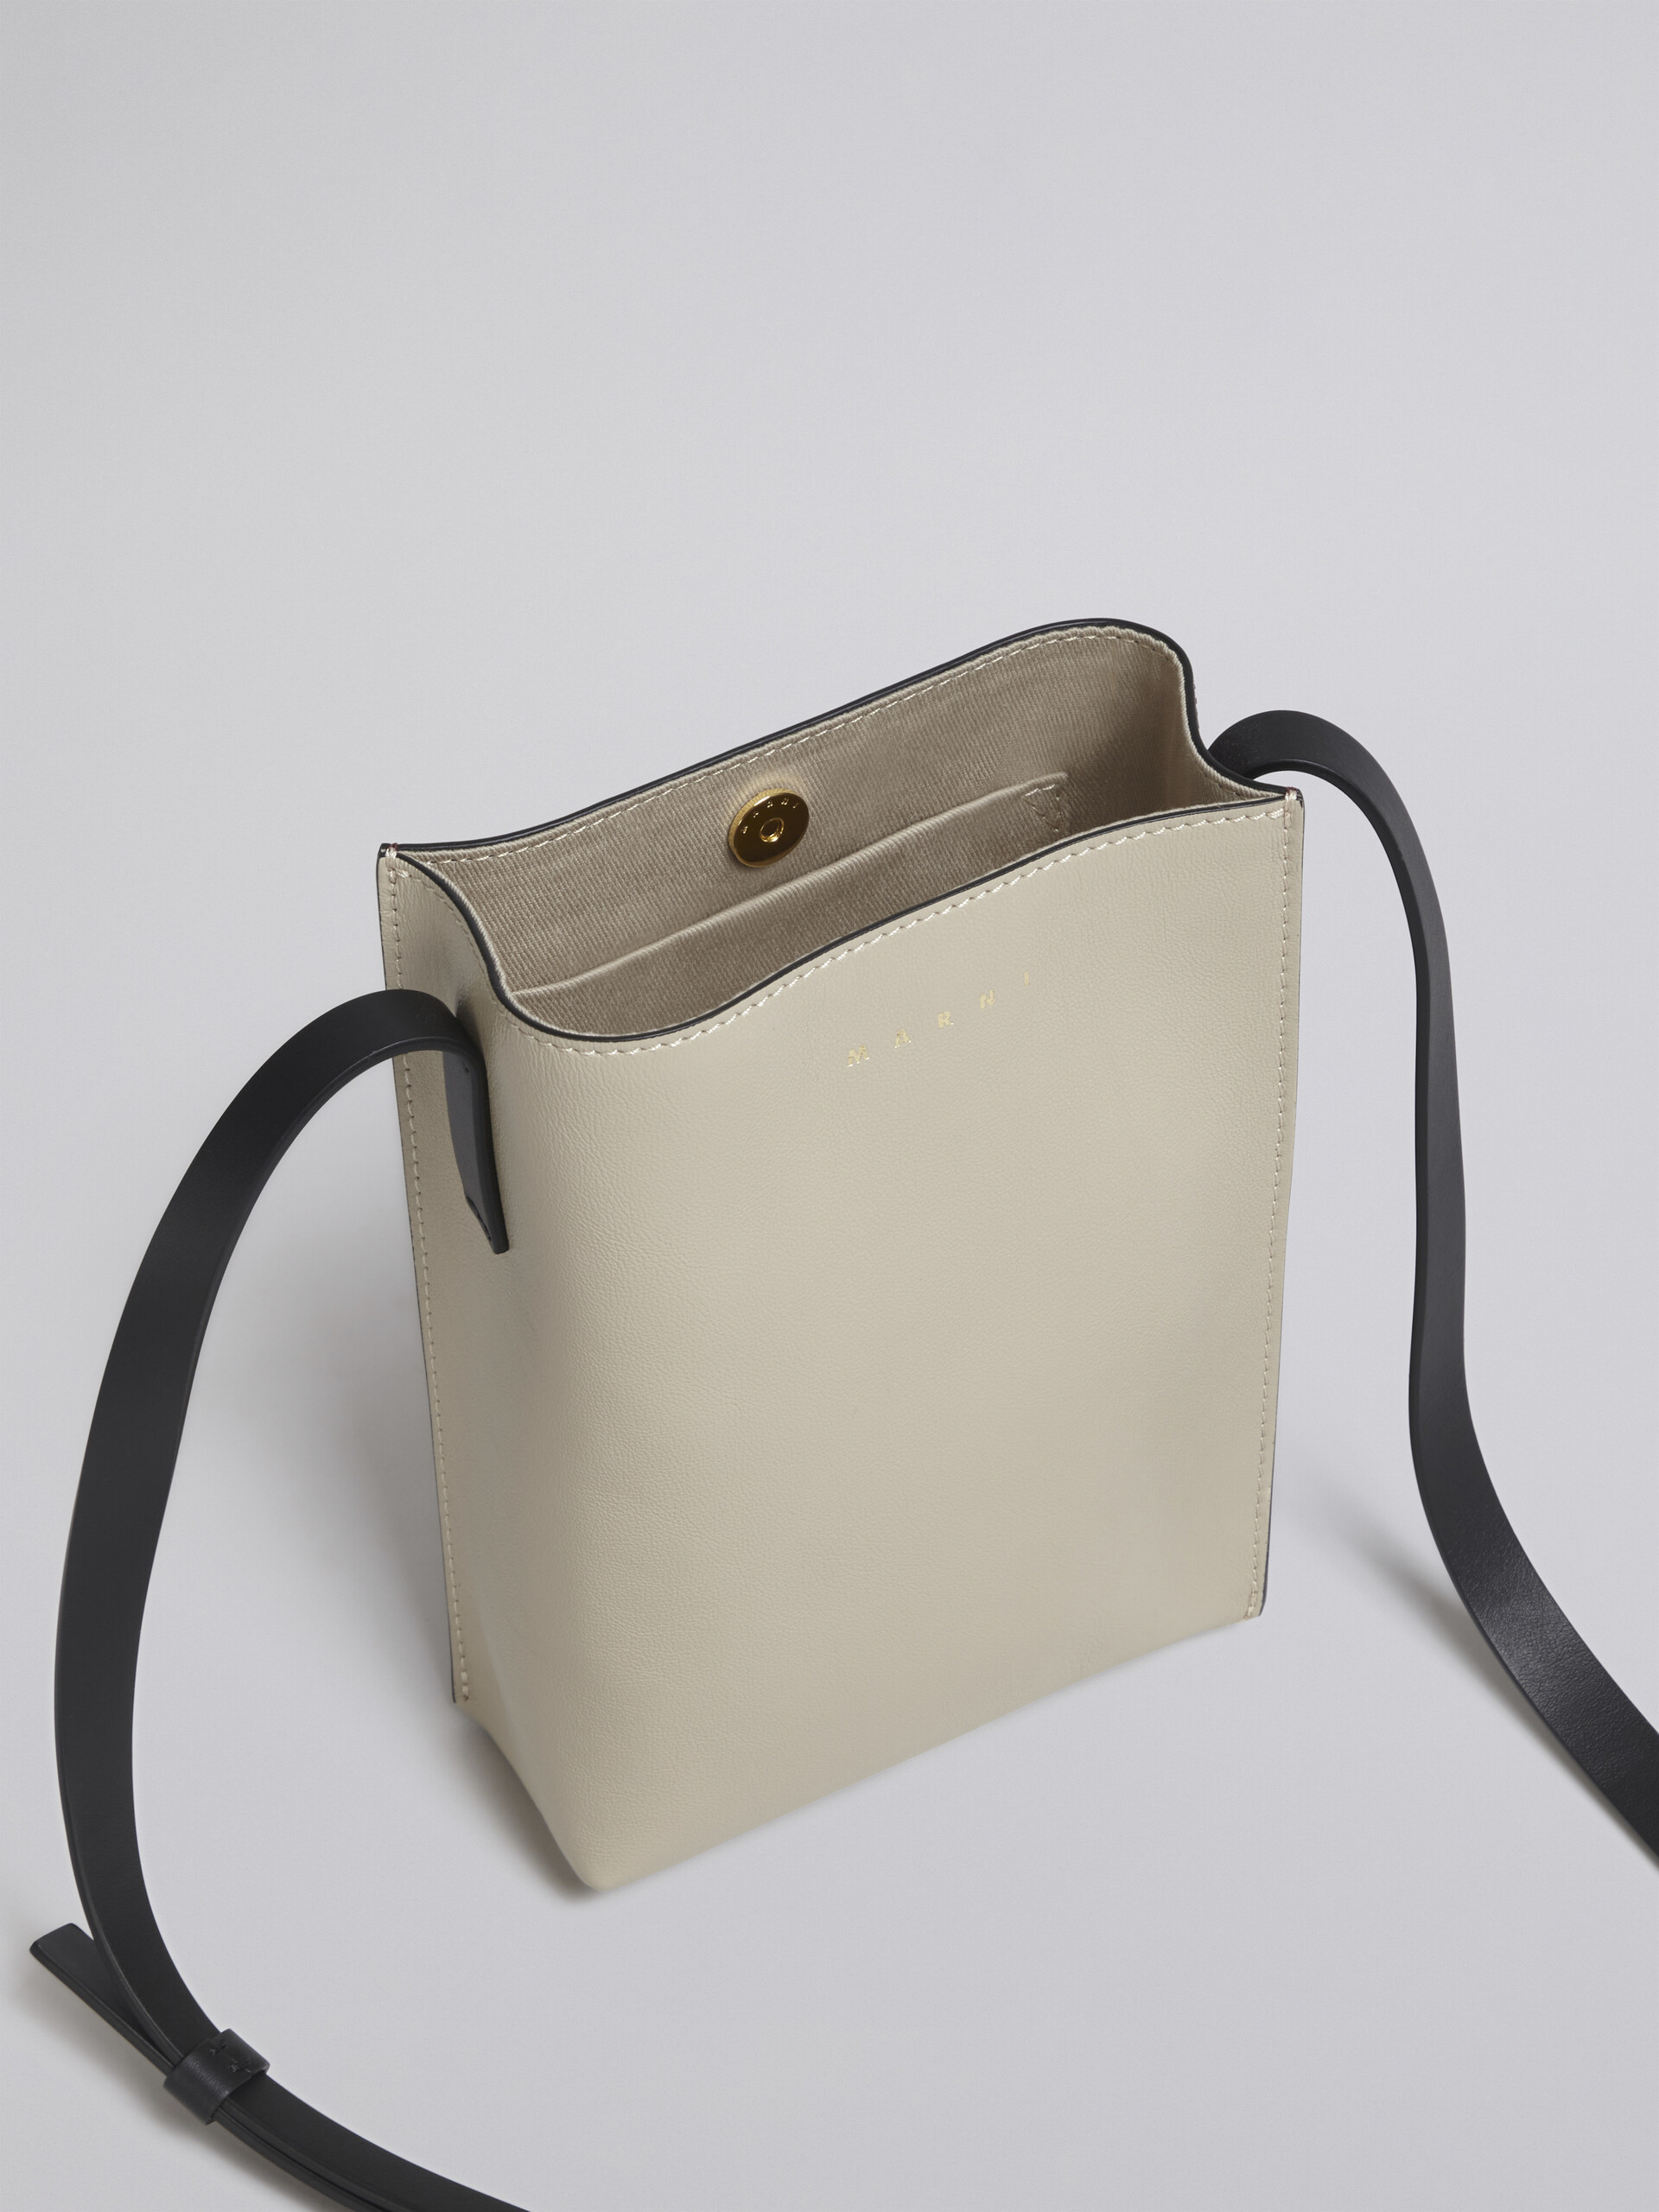 MUSEO SOFT bag in beige and red tumbled calf - Shoulder Bag - Image 2